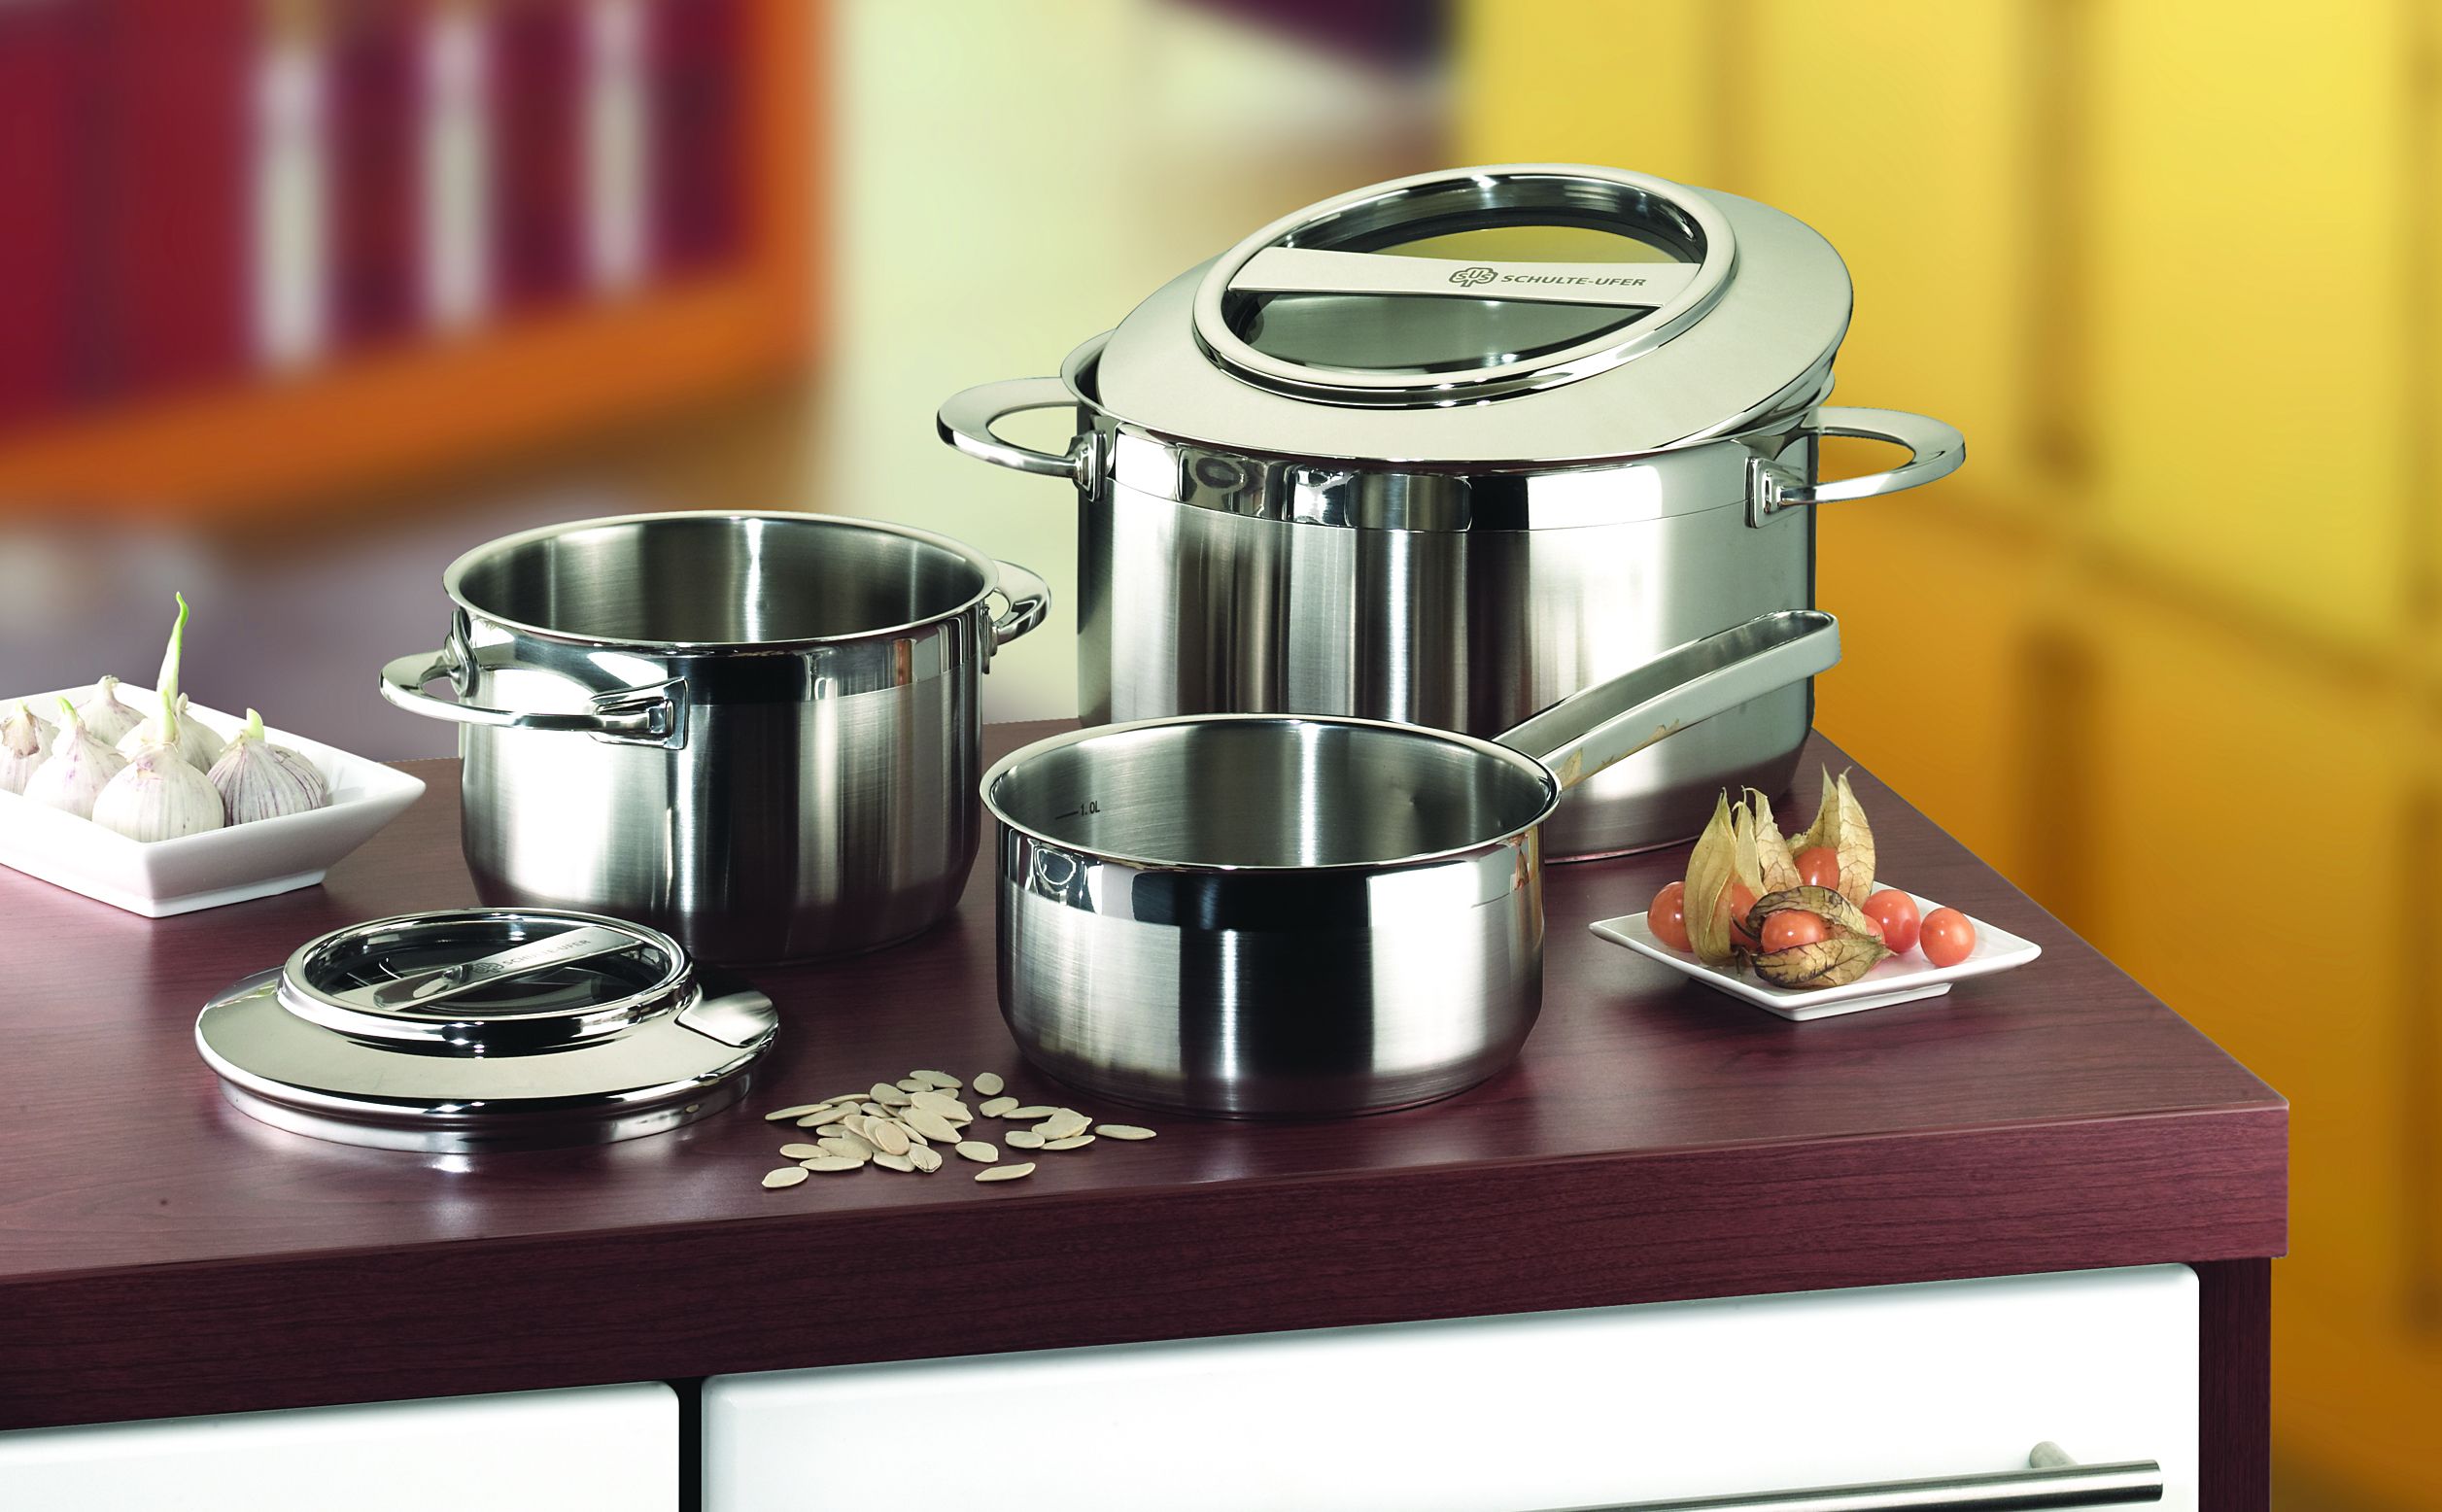 Schulte-Ufer Stainless Steel Pot Sets - North York ON